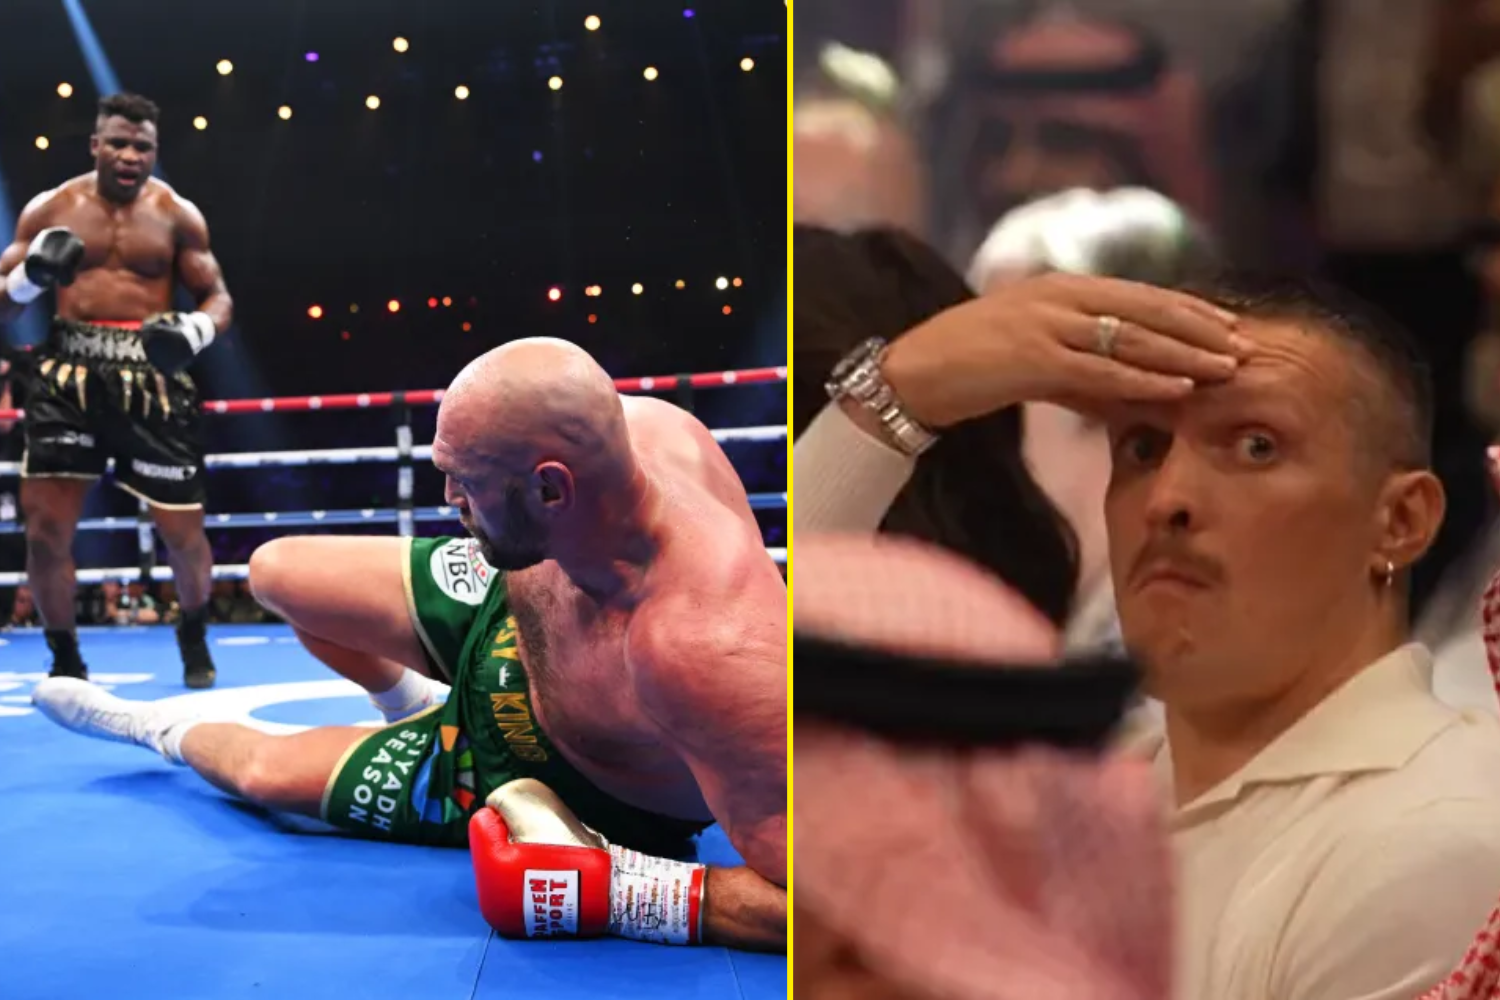 Ringside footage caught Oleksandr Usyk's reaction to Tyson Fury being knocked down by Francis Ngannou